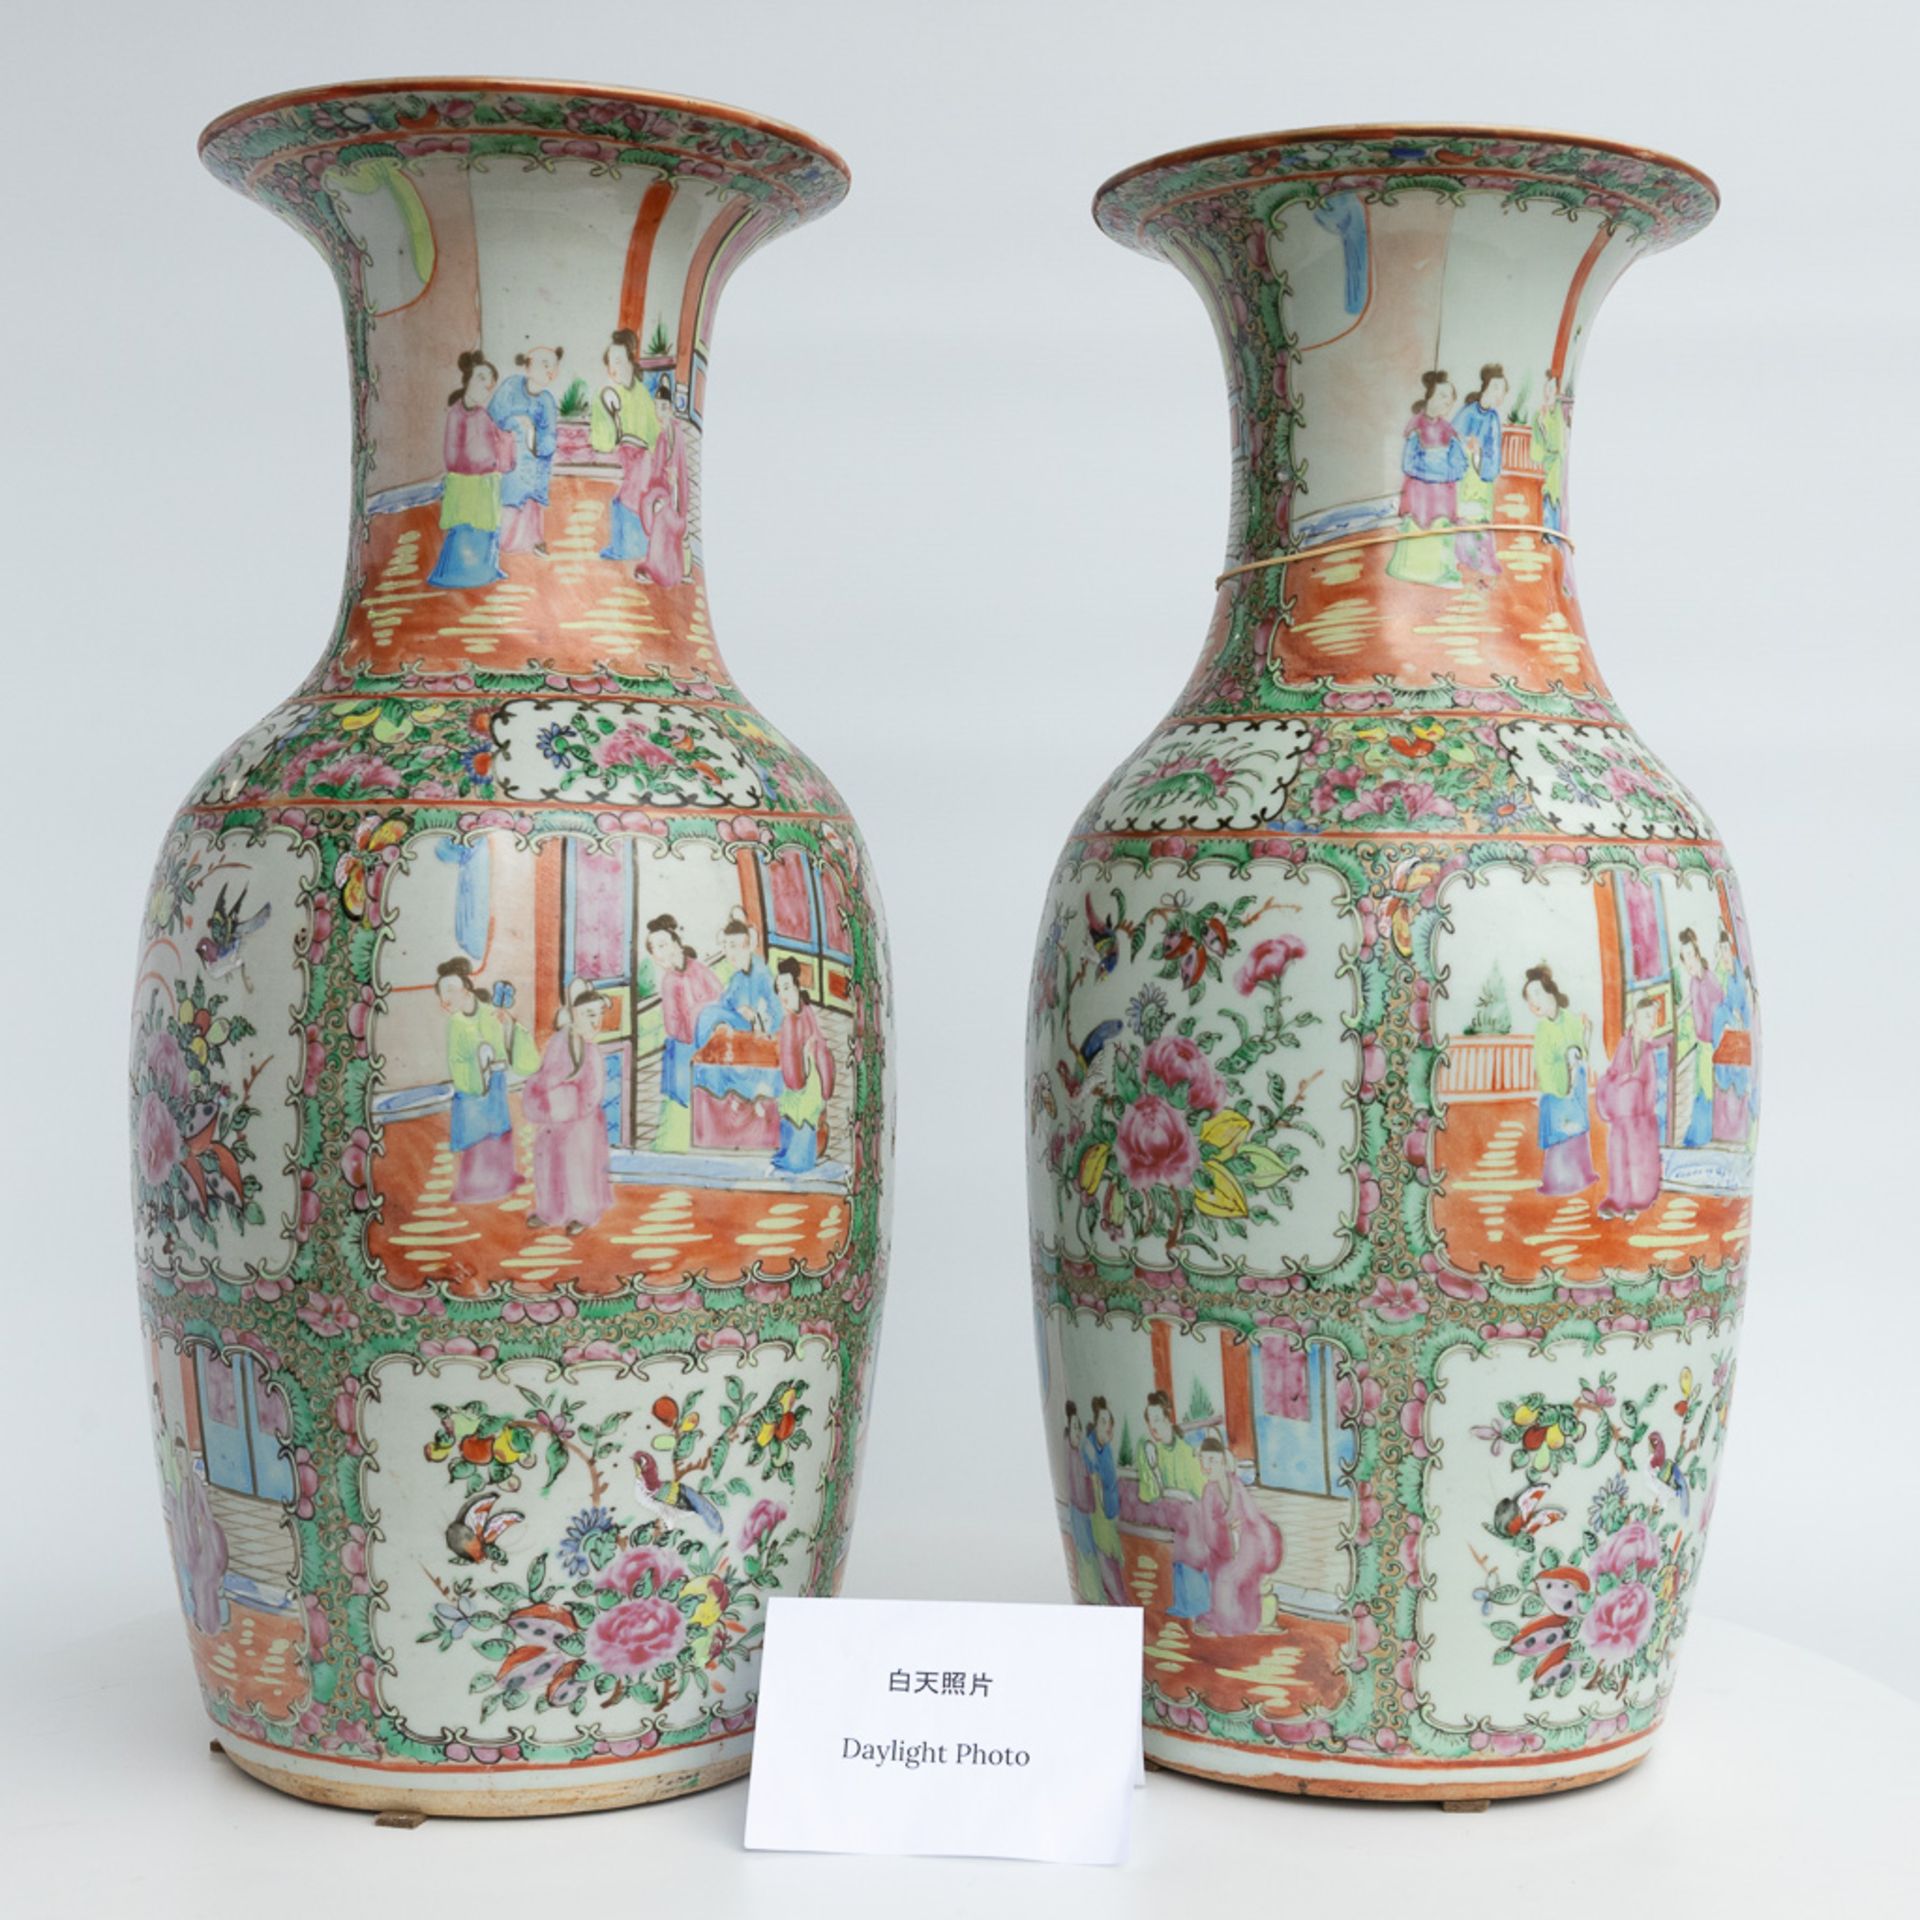 A pair of vases made of Chinese porcelain in Canton style. 19th century. - Image 17 of 17